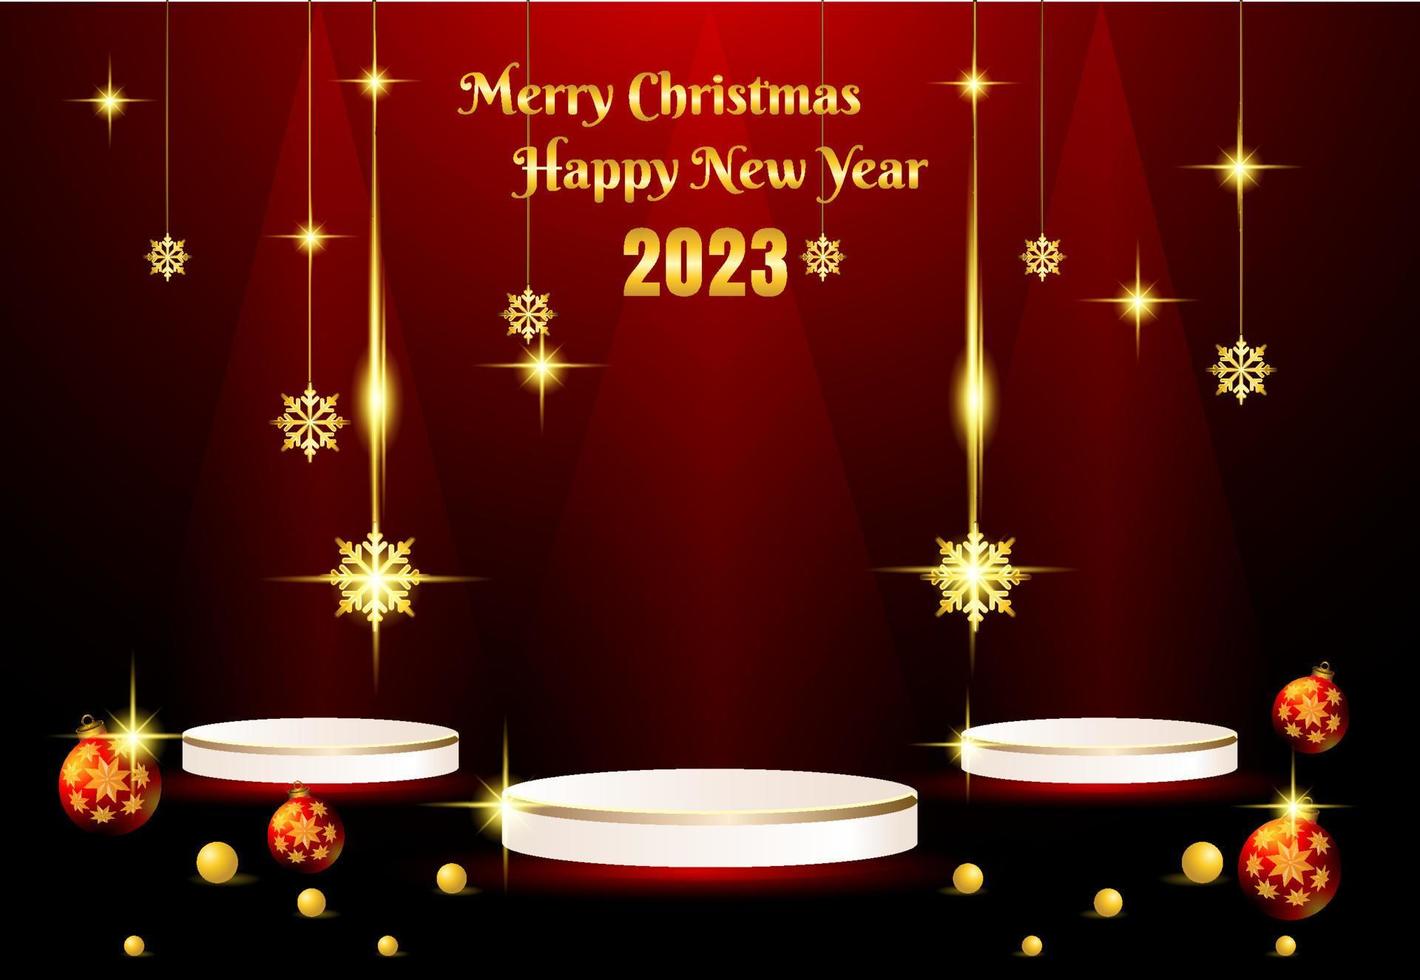 Merry christmas and happy new year 2023 stage podium background vector